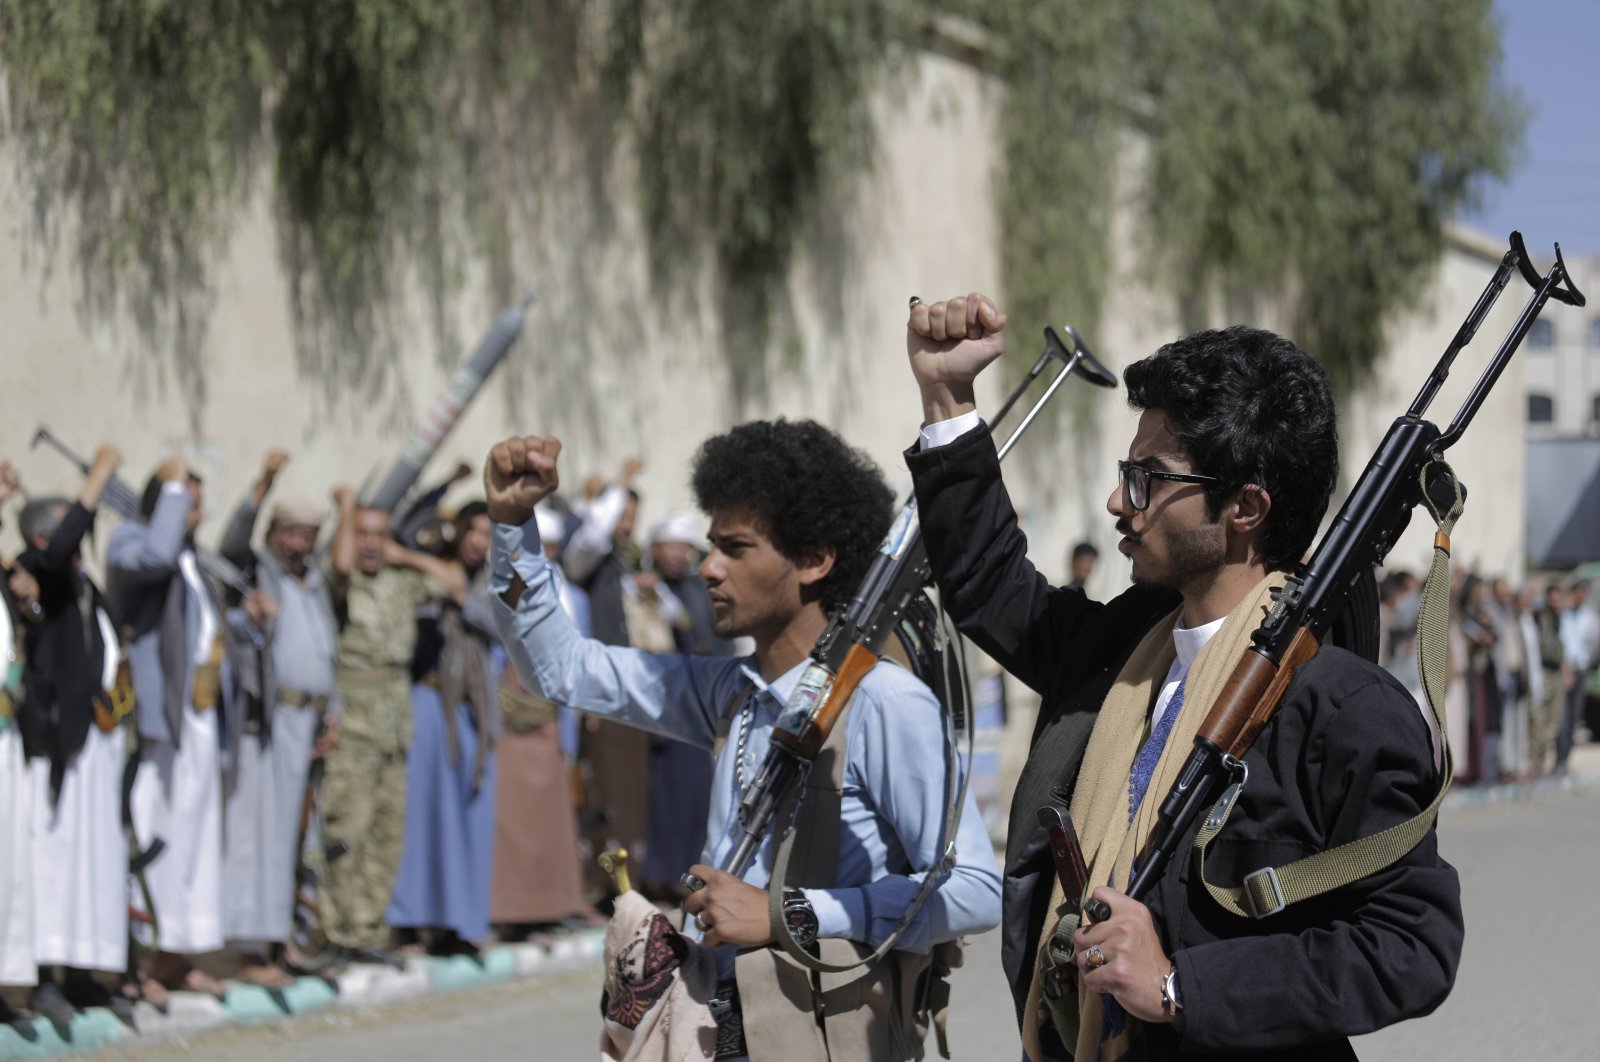 Tribesmen loyal to the Houthi rebels chant slogans during a gathering aimed at mobilizing more fighters for the Houthi movement in Sanaa, Yemen, Feb. 25, 2020. (AP Photo)